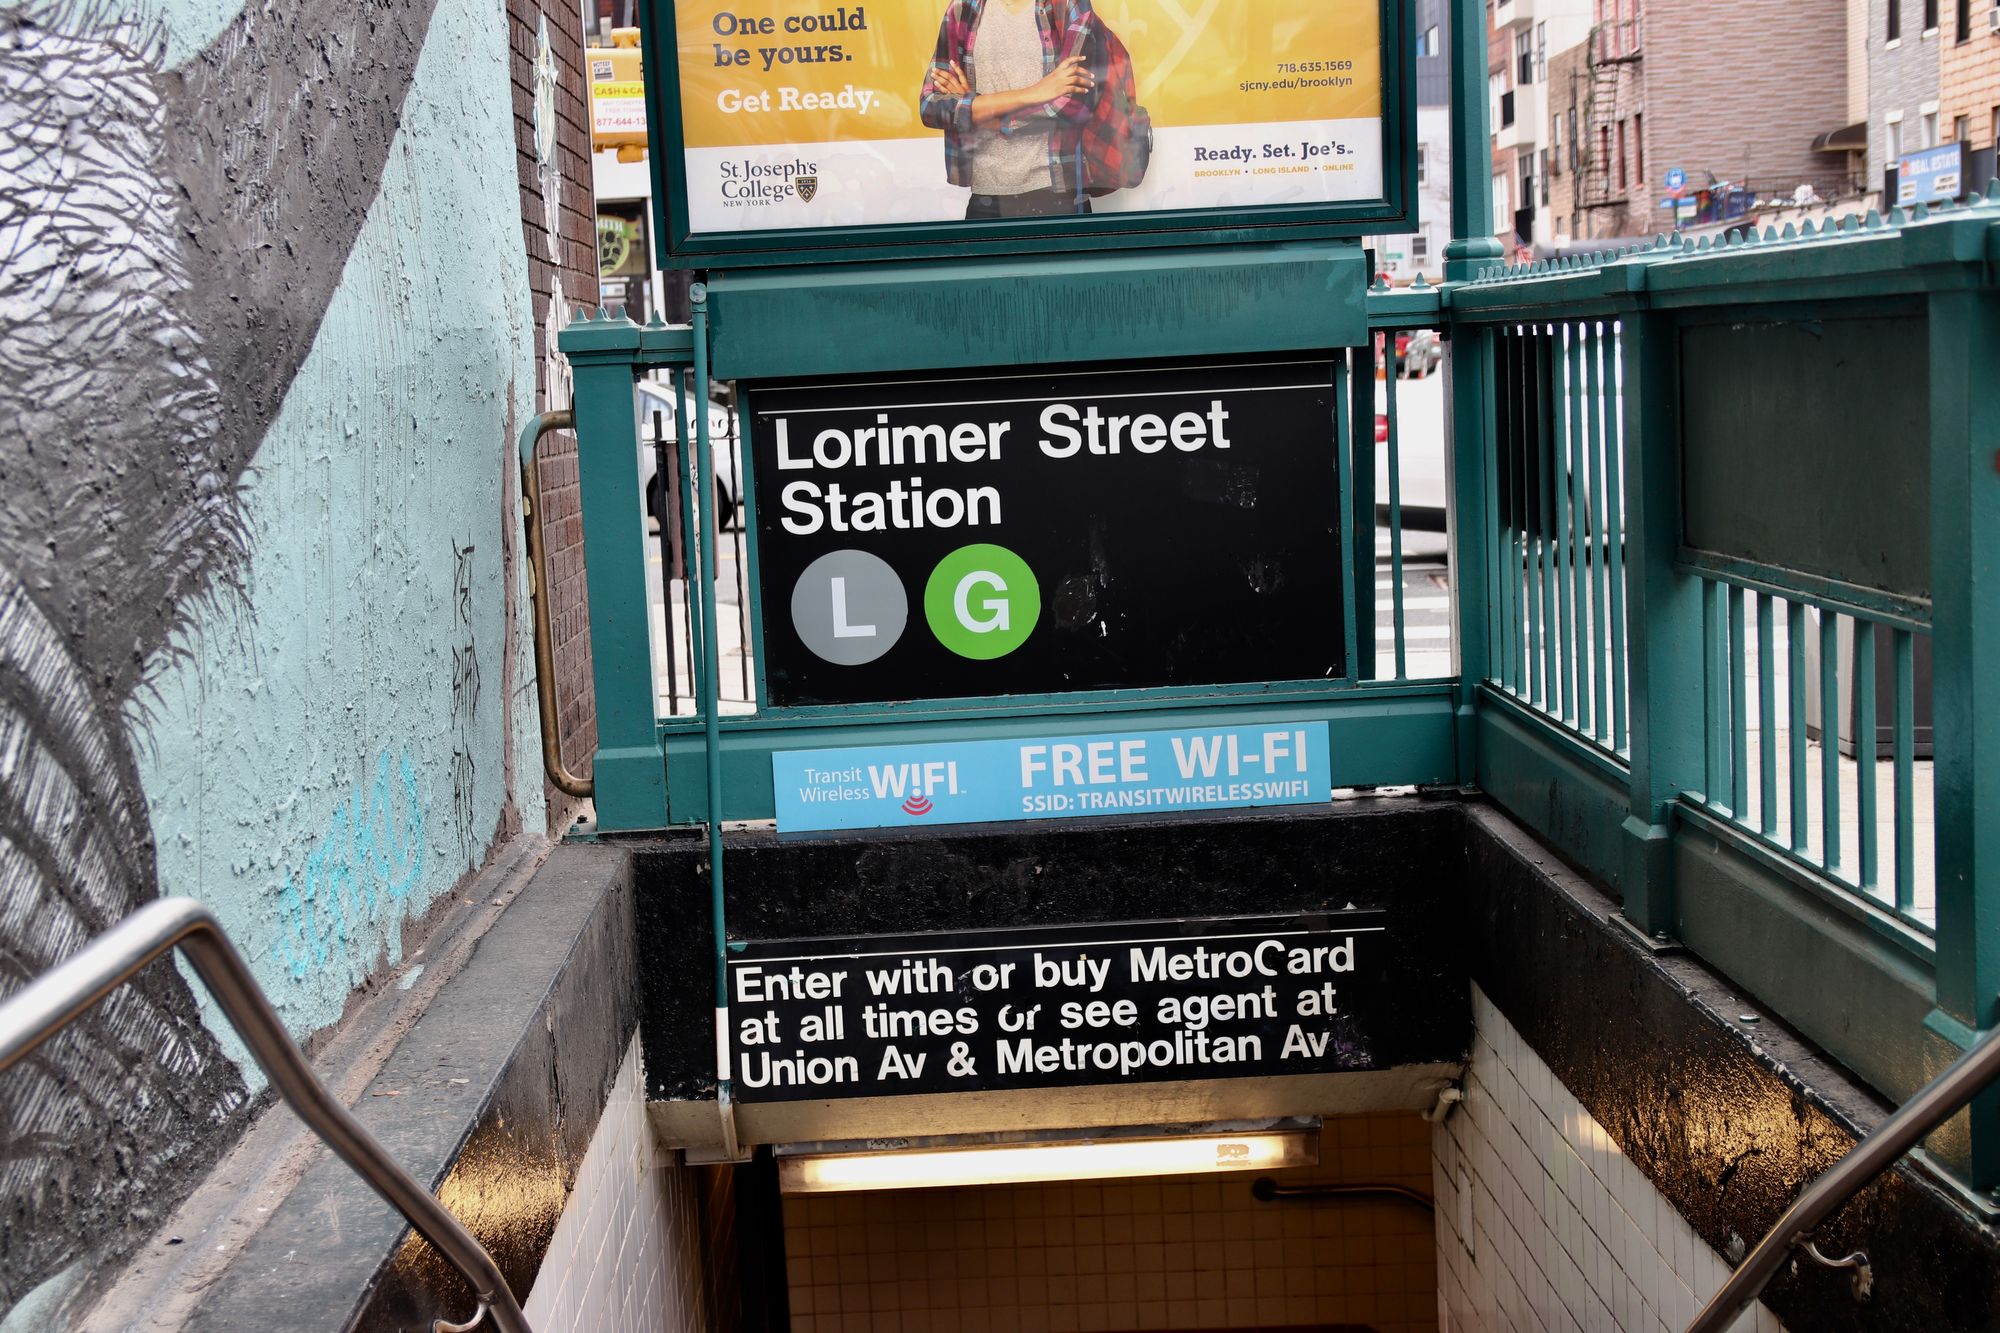 Where Does The L Train Go From Here?